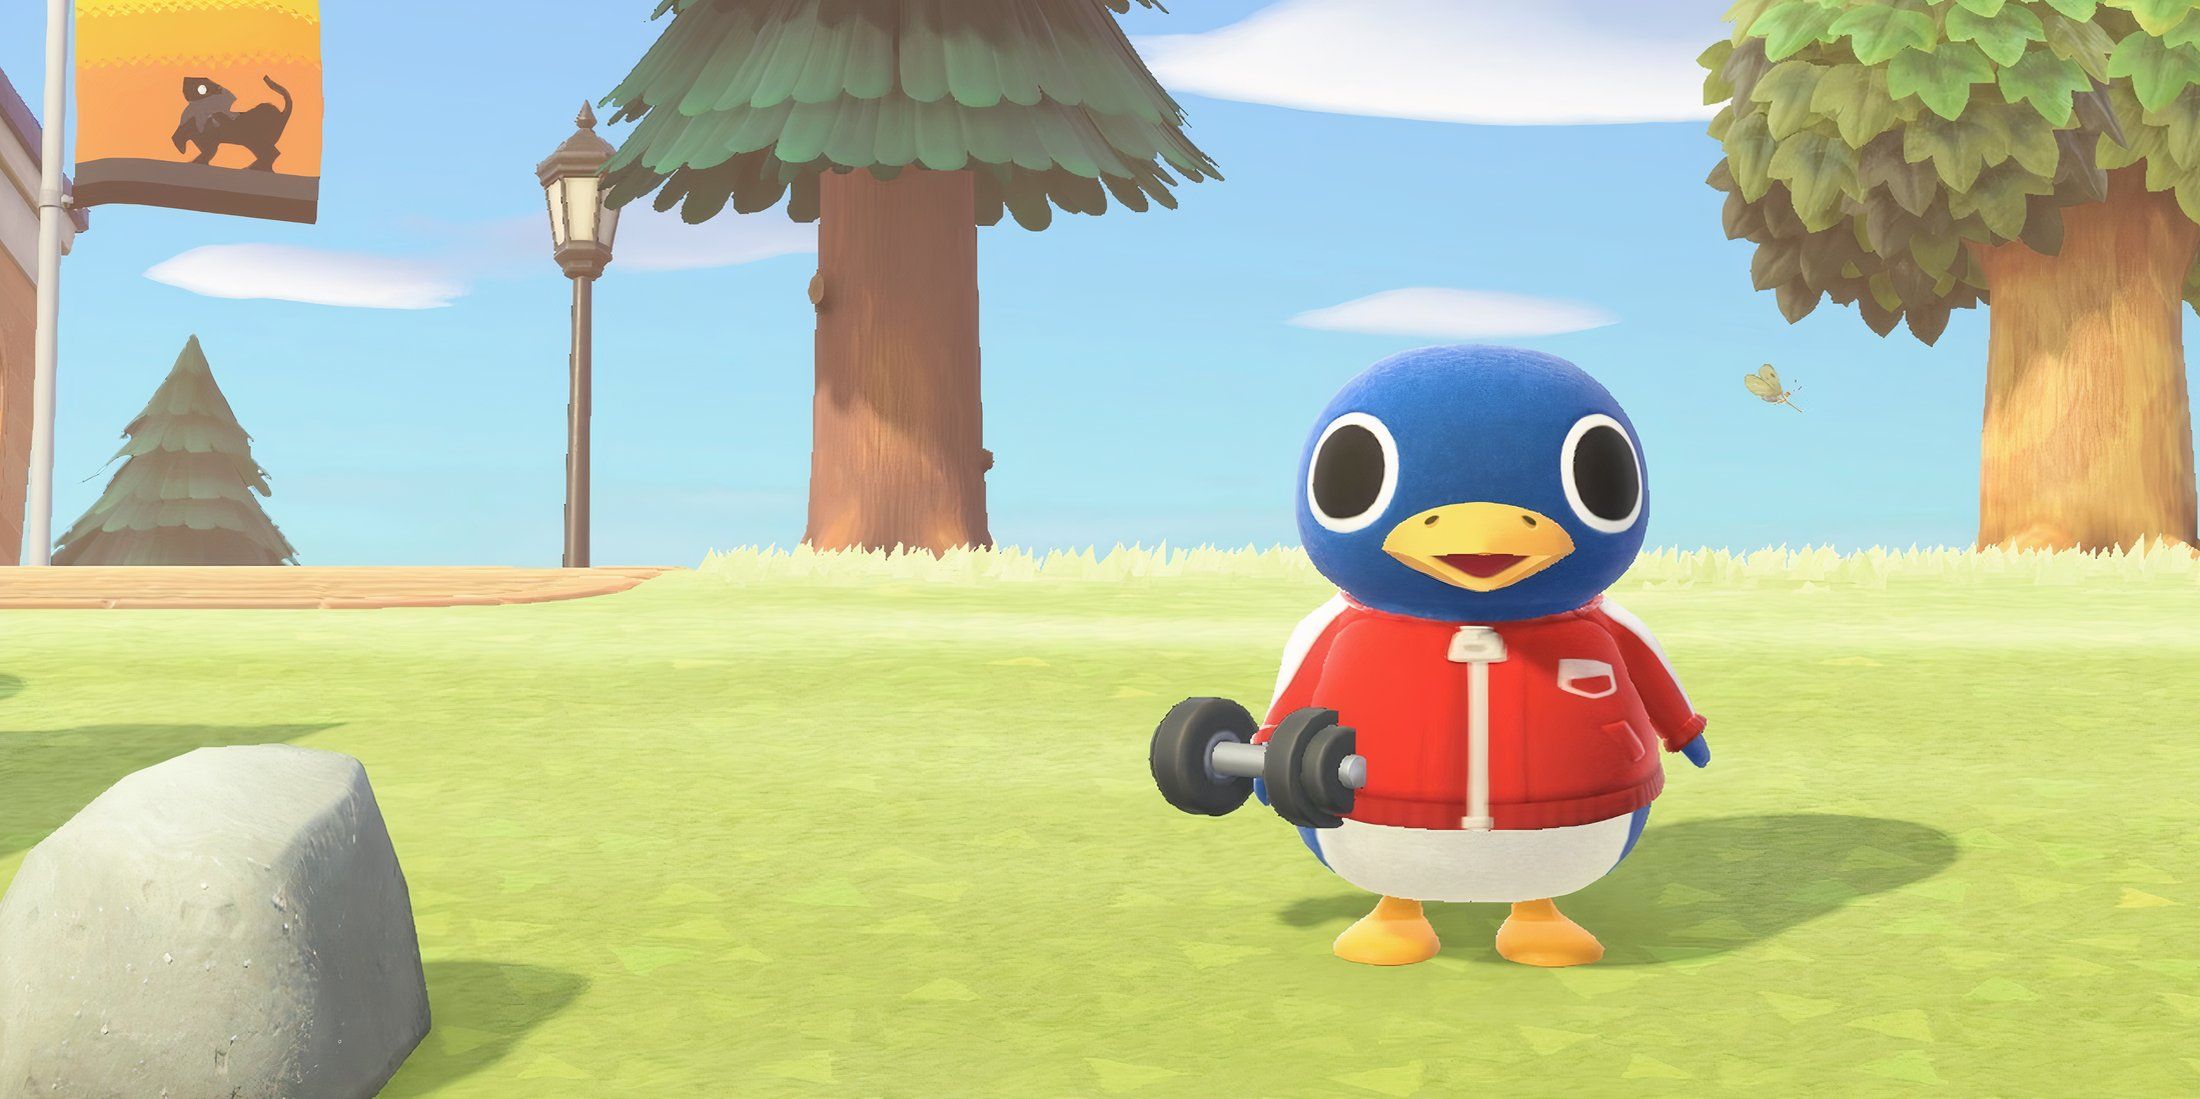 Roald from Animal Crossing New Horizons holding a dumbbell